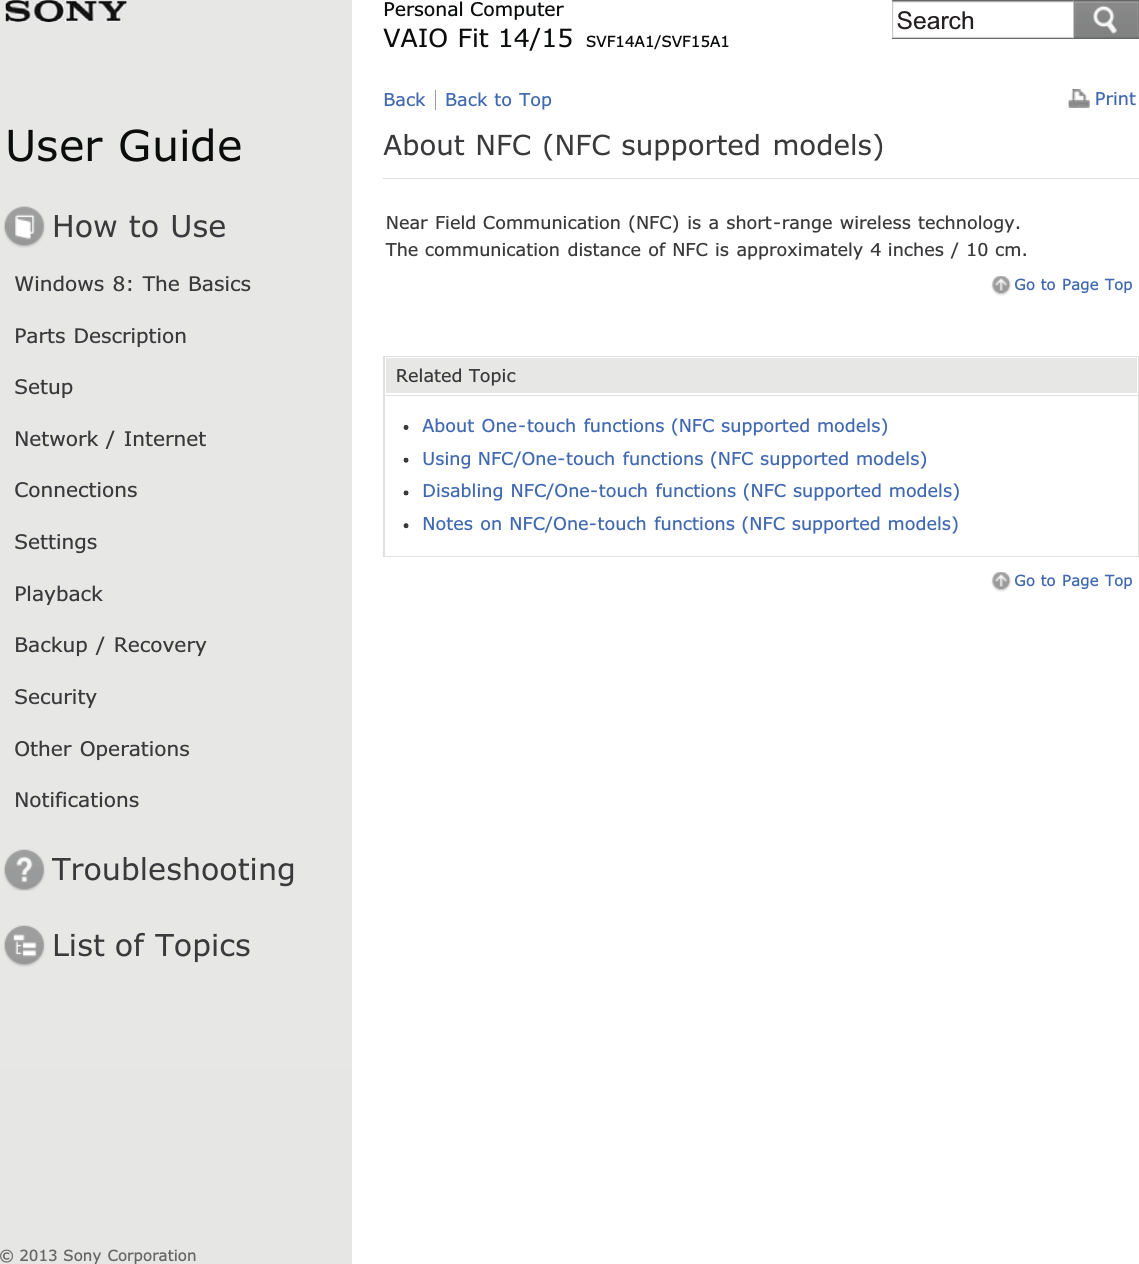 User GuideHow to UseWindows 8: The BasicsParts DescriptionSetupNetwork / InternetConnectionsSettingsPlaybackBackup / RecoverySecurityOther OperationsNotificationsTroubleshootingList of TopicsPrintPersonal ComputerVAIO Fit 14/15 SVF14A1/SVF15A1About NFC (NFC supported models)Near Field Communication (NFC) is a short-range wireless technology.The communication distance of NFC is approximately 4 inches / 10 cm.Go to Page TopRelated TopicAbout One-touch functions (NFC supported models)Using NFC/One-touch functions (NFC supported models)Disabling NFC/One-touch functions (NFC supported models)Notes on NFC/One-touch functions (NFC supported models)Go to Page TopBack Back to Top© 2013 Sony CorporationSearch